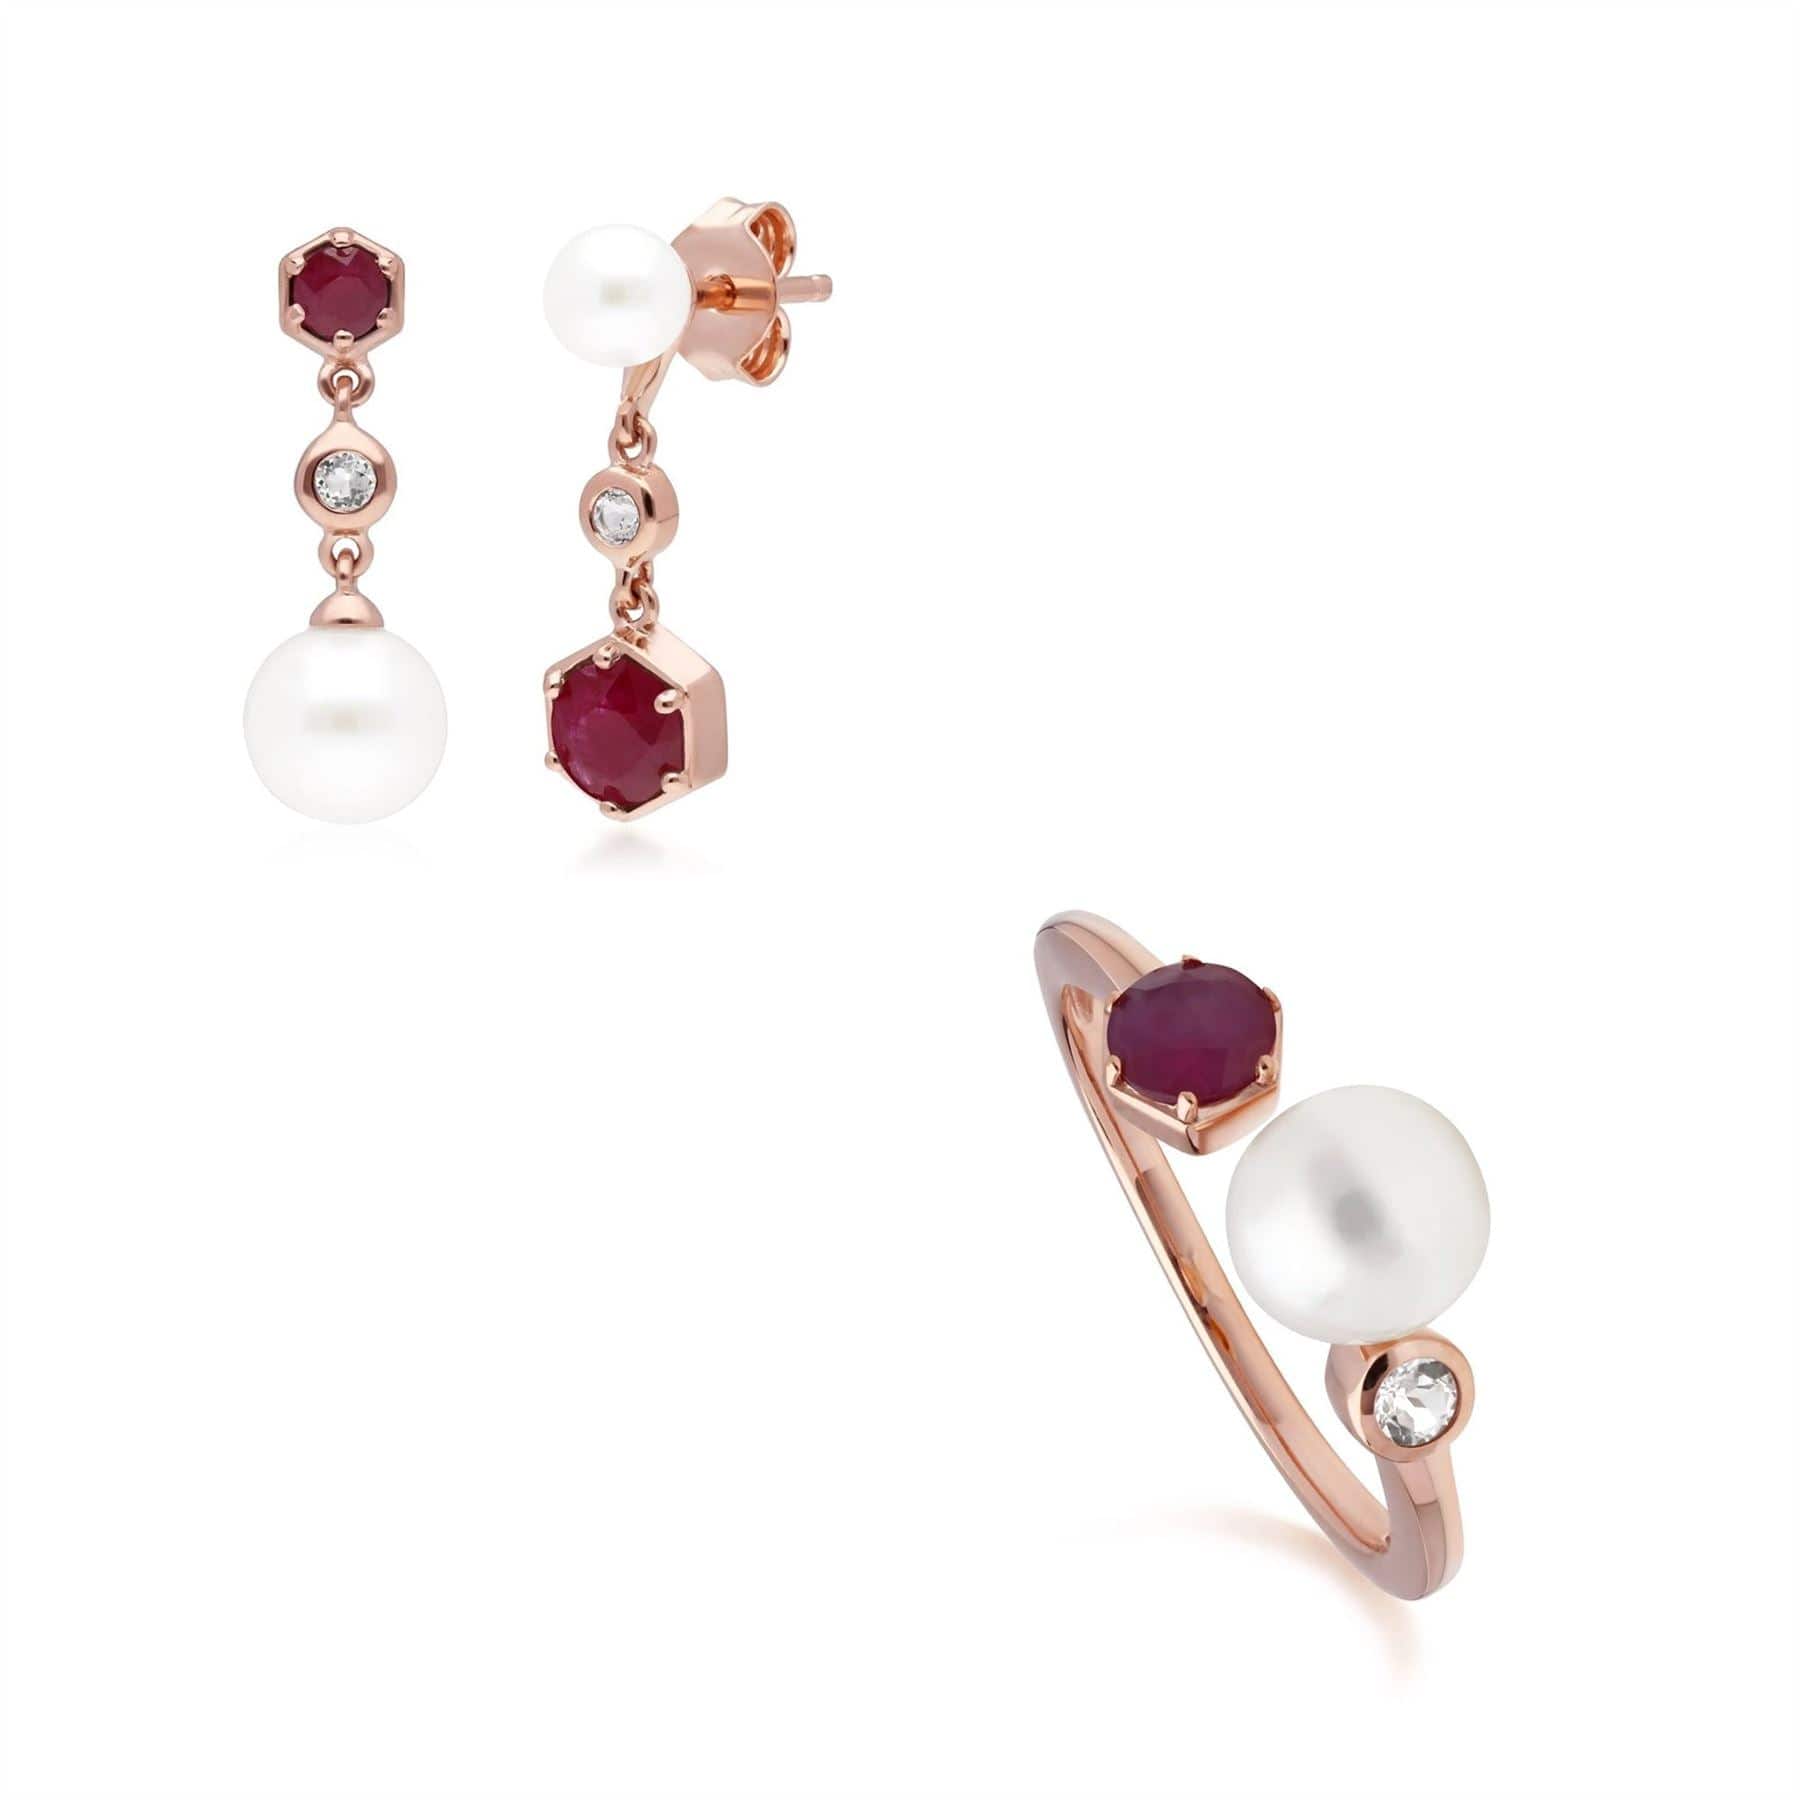 Modern Pearl, Ruby & Topaz Earring & Ring Set in Rose Gold Plated Silver - Gemondo